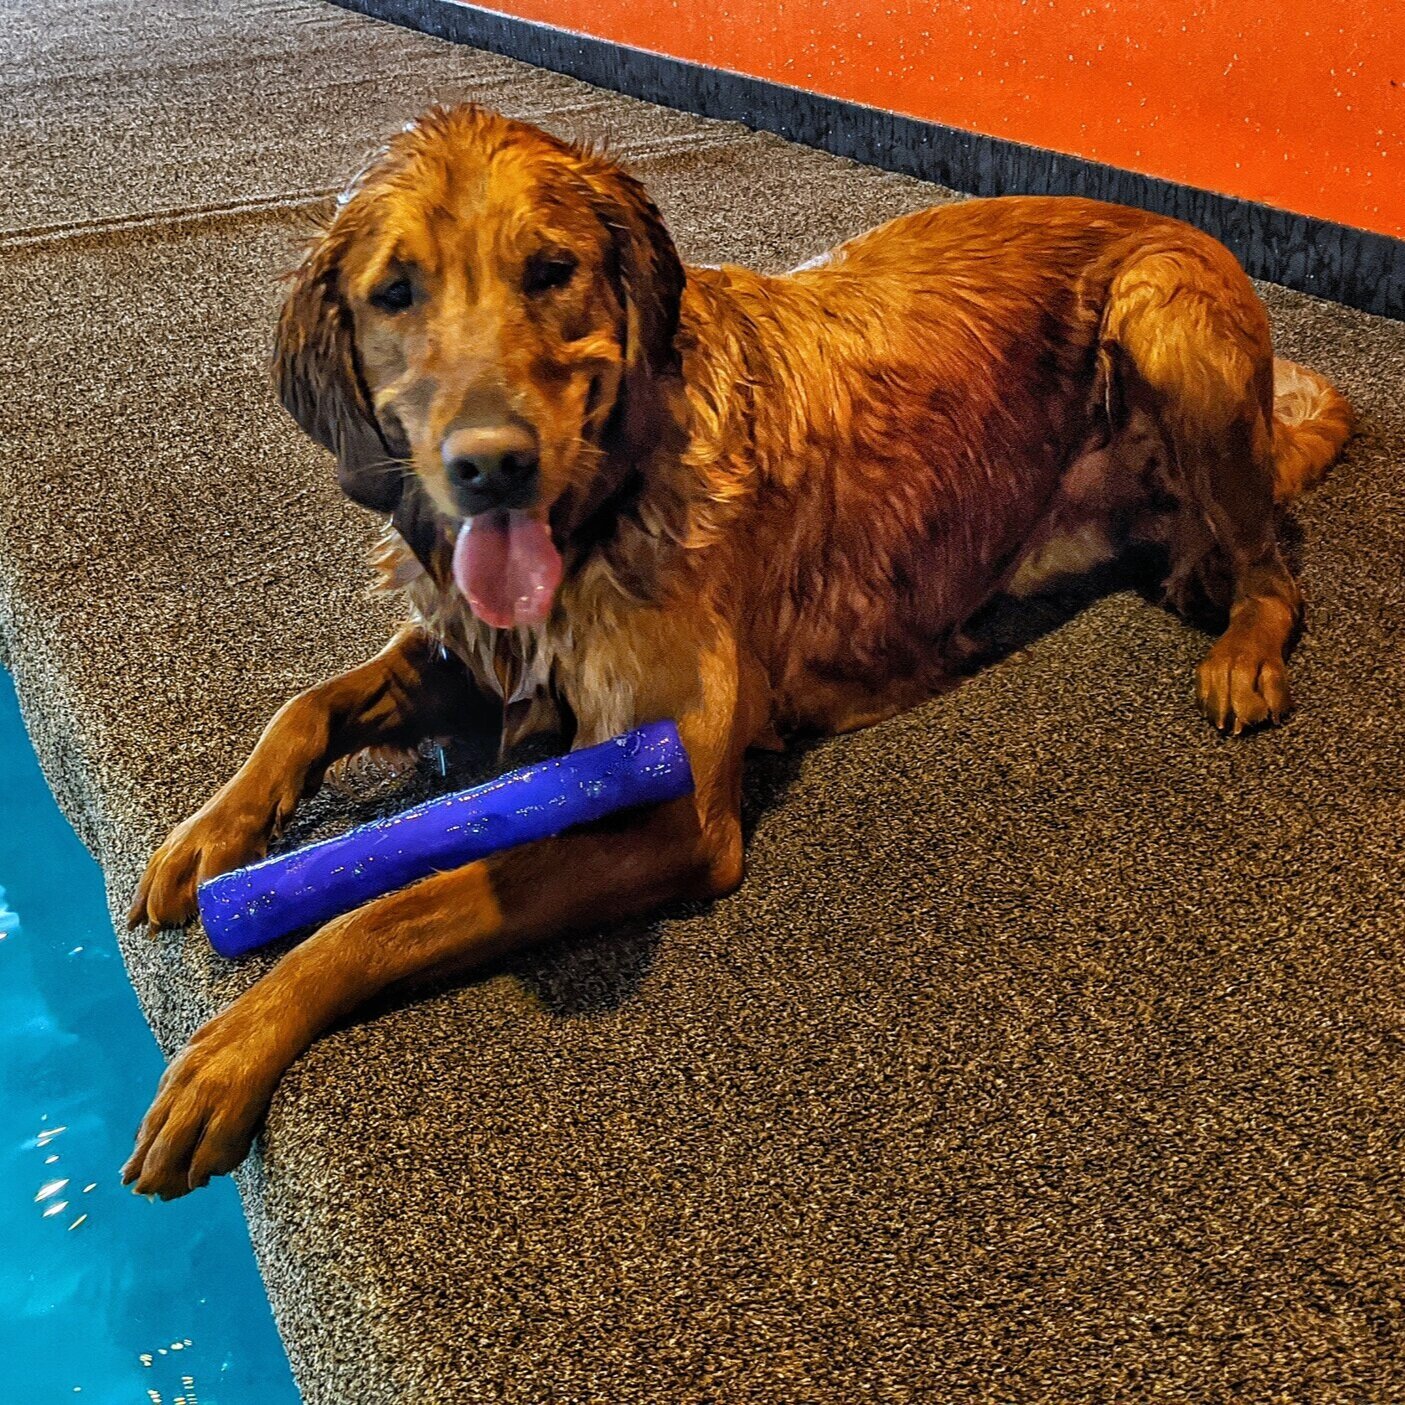 A golden retriever sits panting on the side of an indoor dog pool after swimming